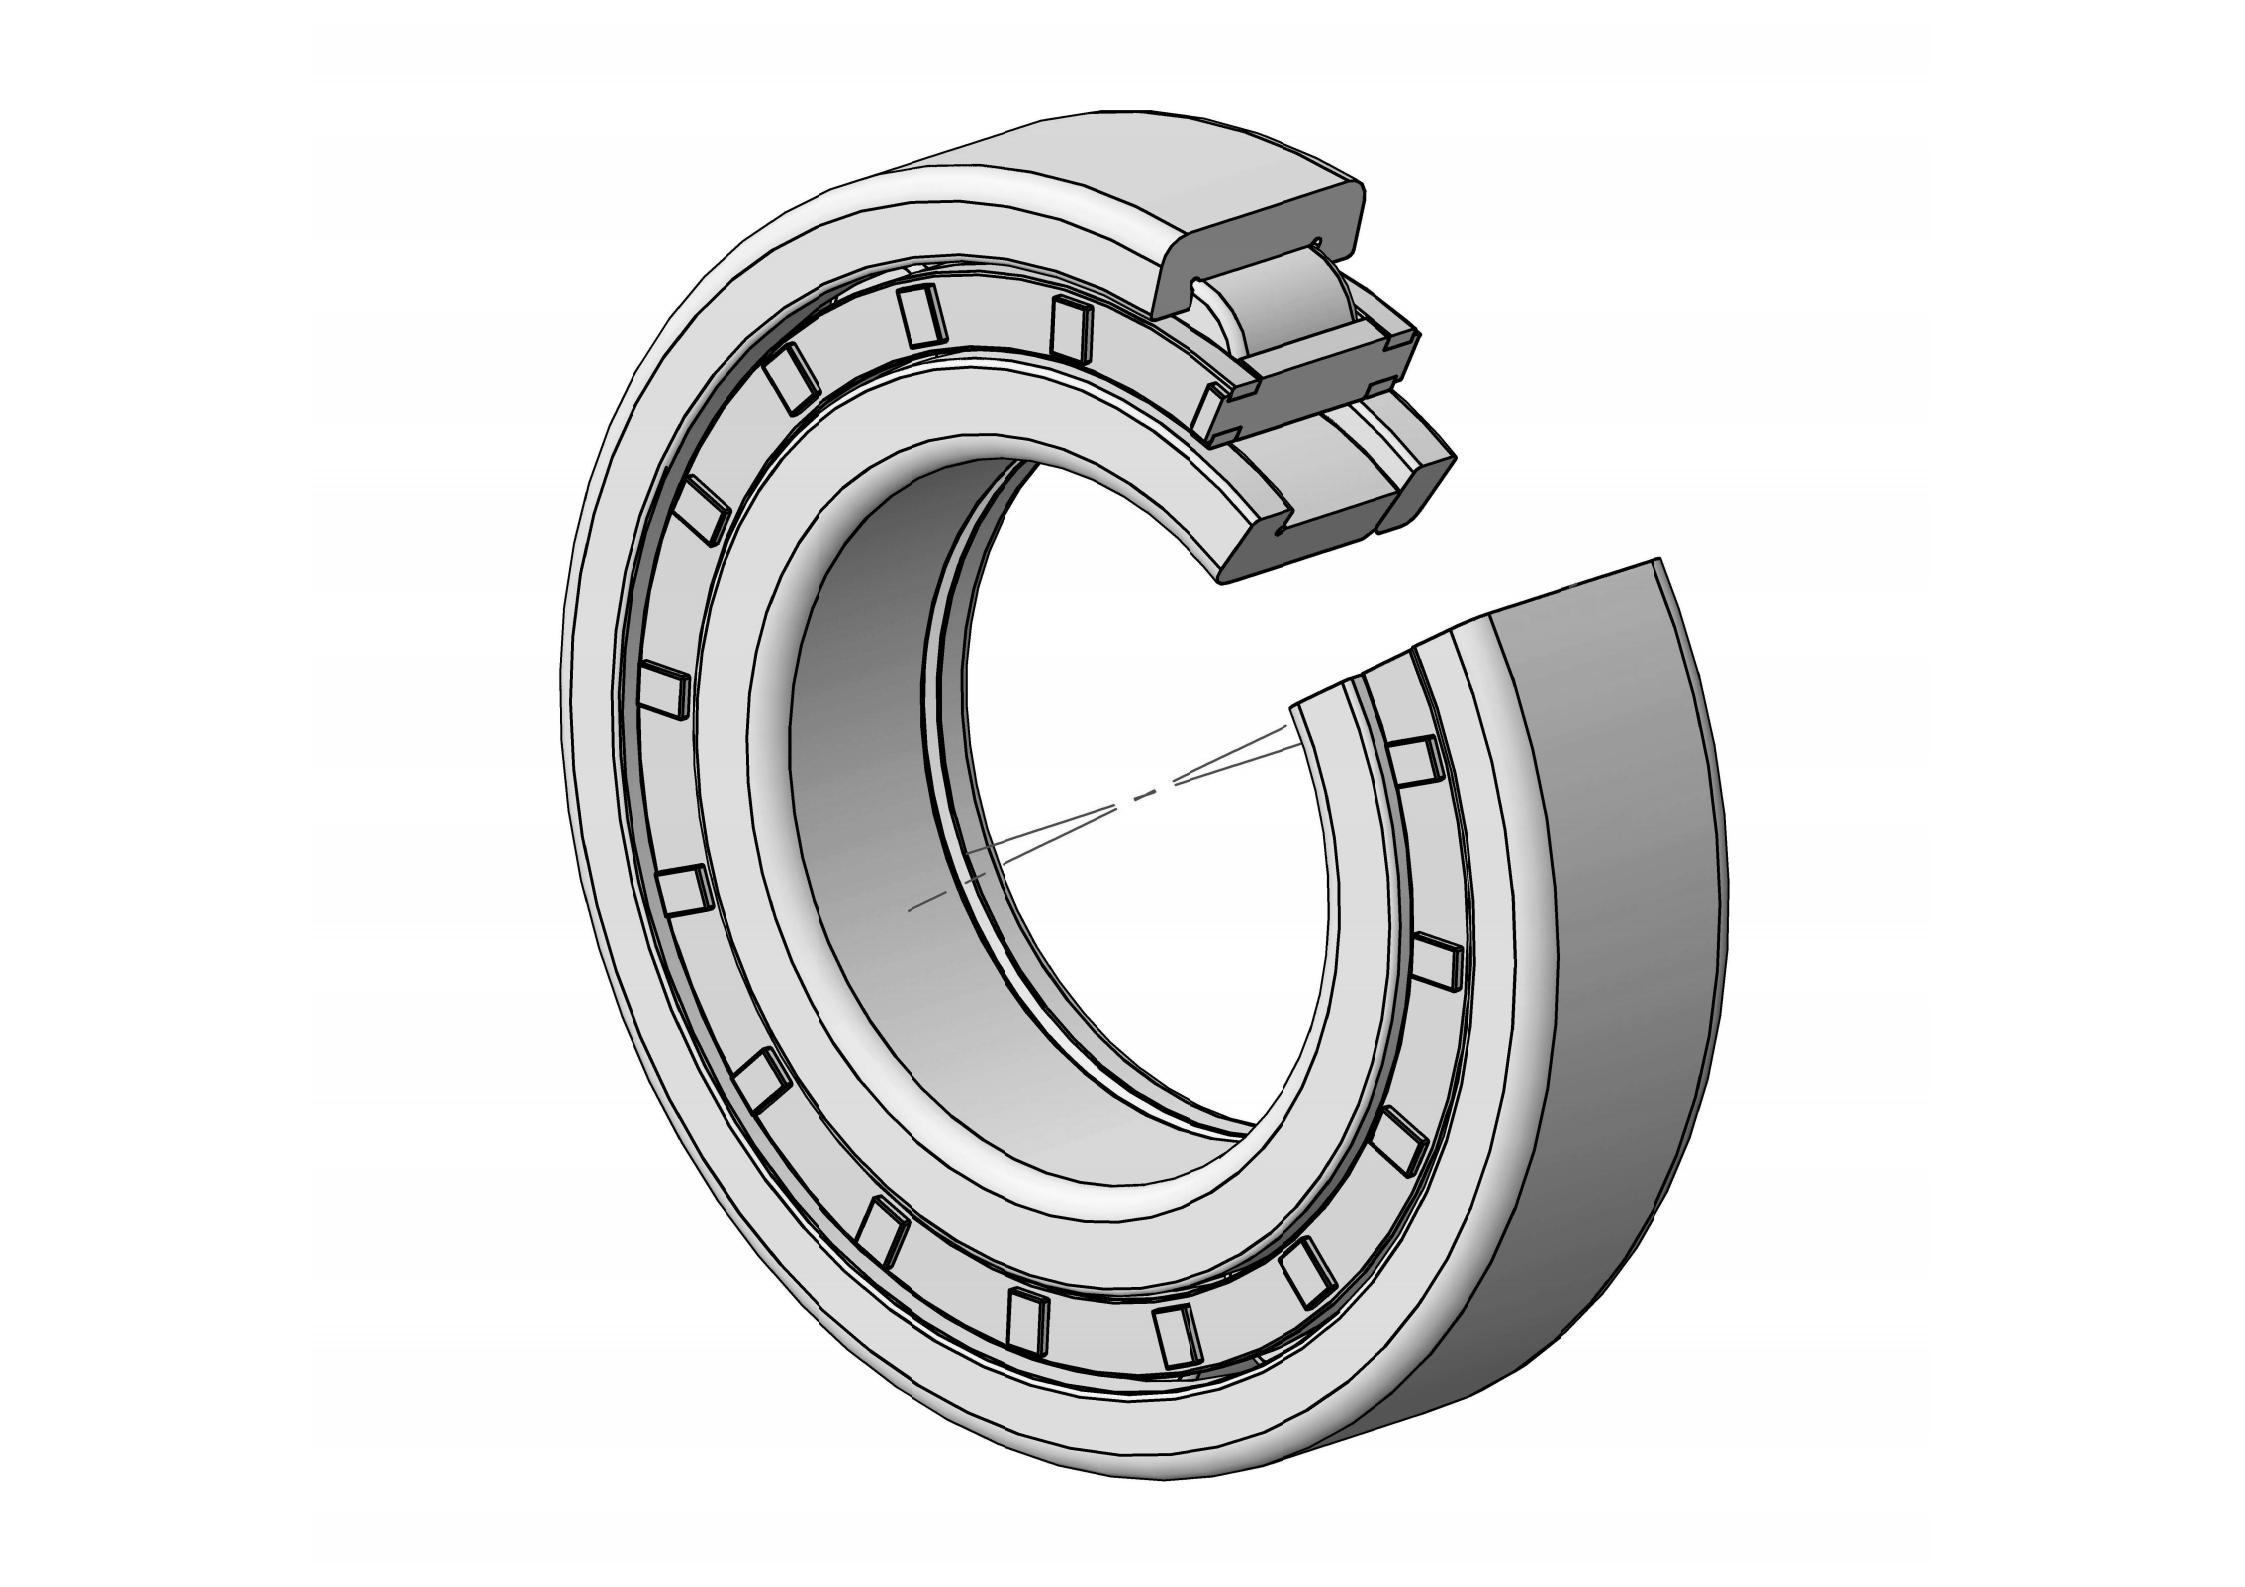 NUP217-E Single Row Cylindrical roller bearing 